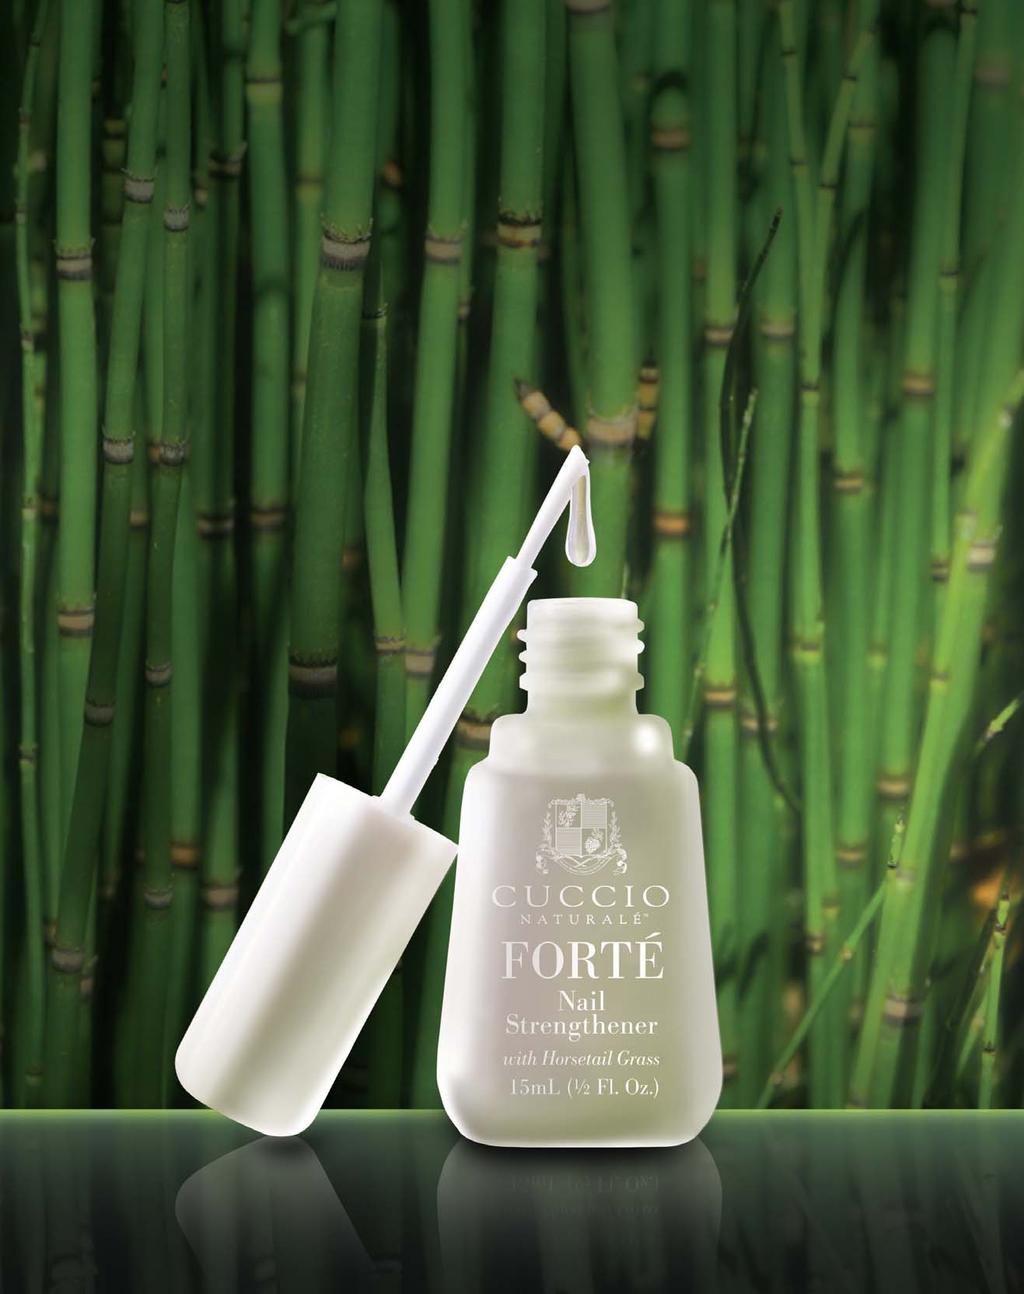 Strengþ and No Formaldehyde or Toluene Flexibility Infused with Horsetail Grass for Added Strength & Flexibility Forté Nail Strengthener No Formaldehyde or toluene.